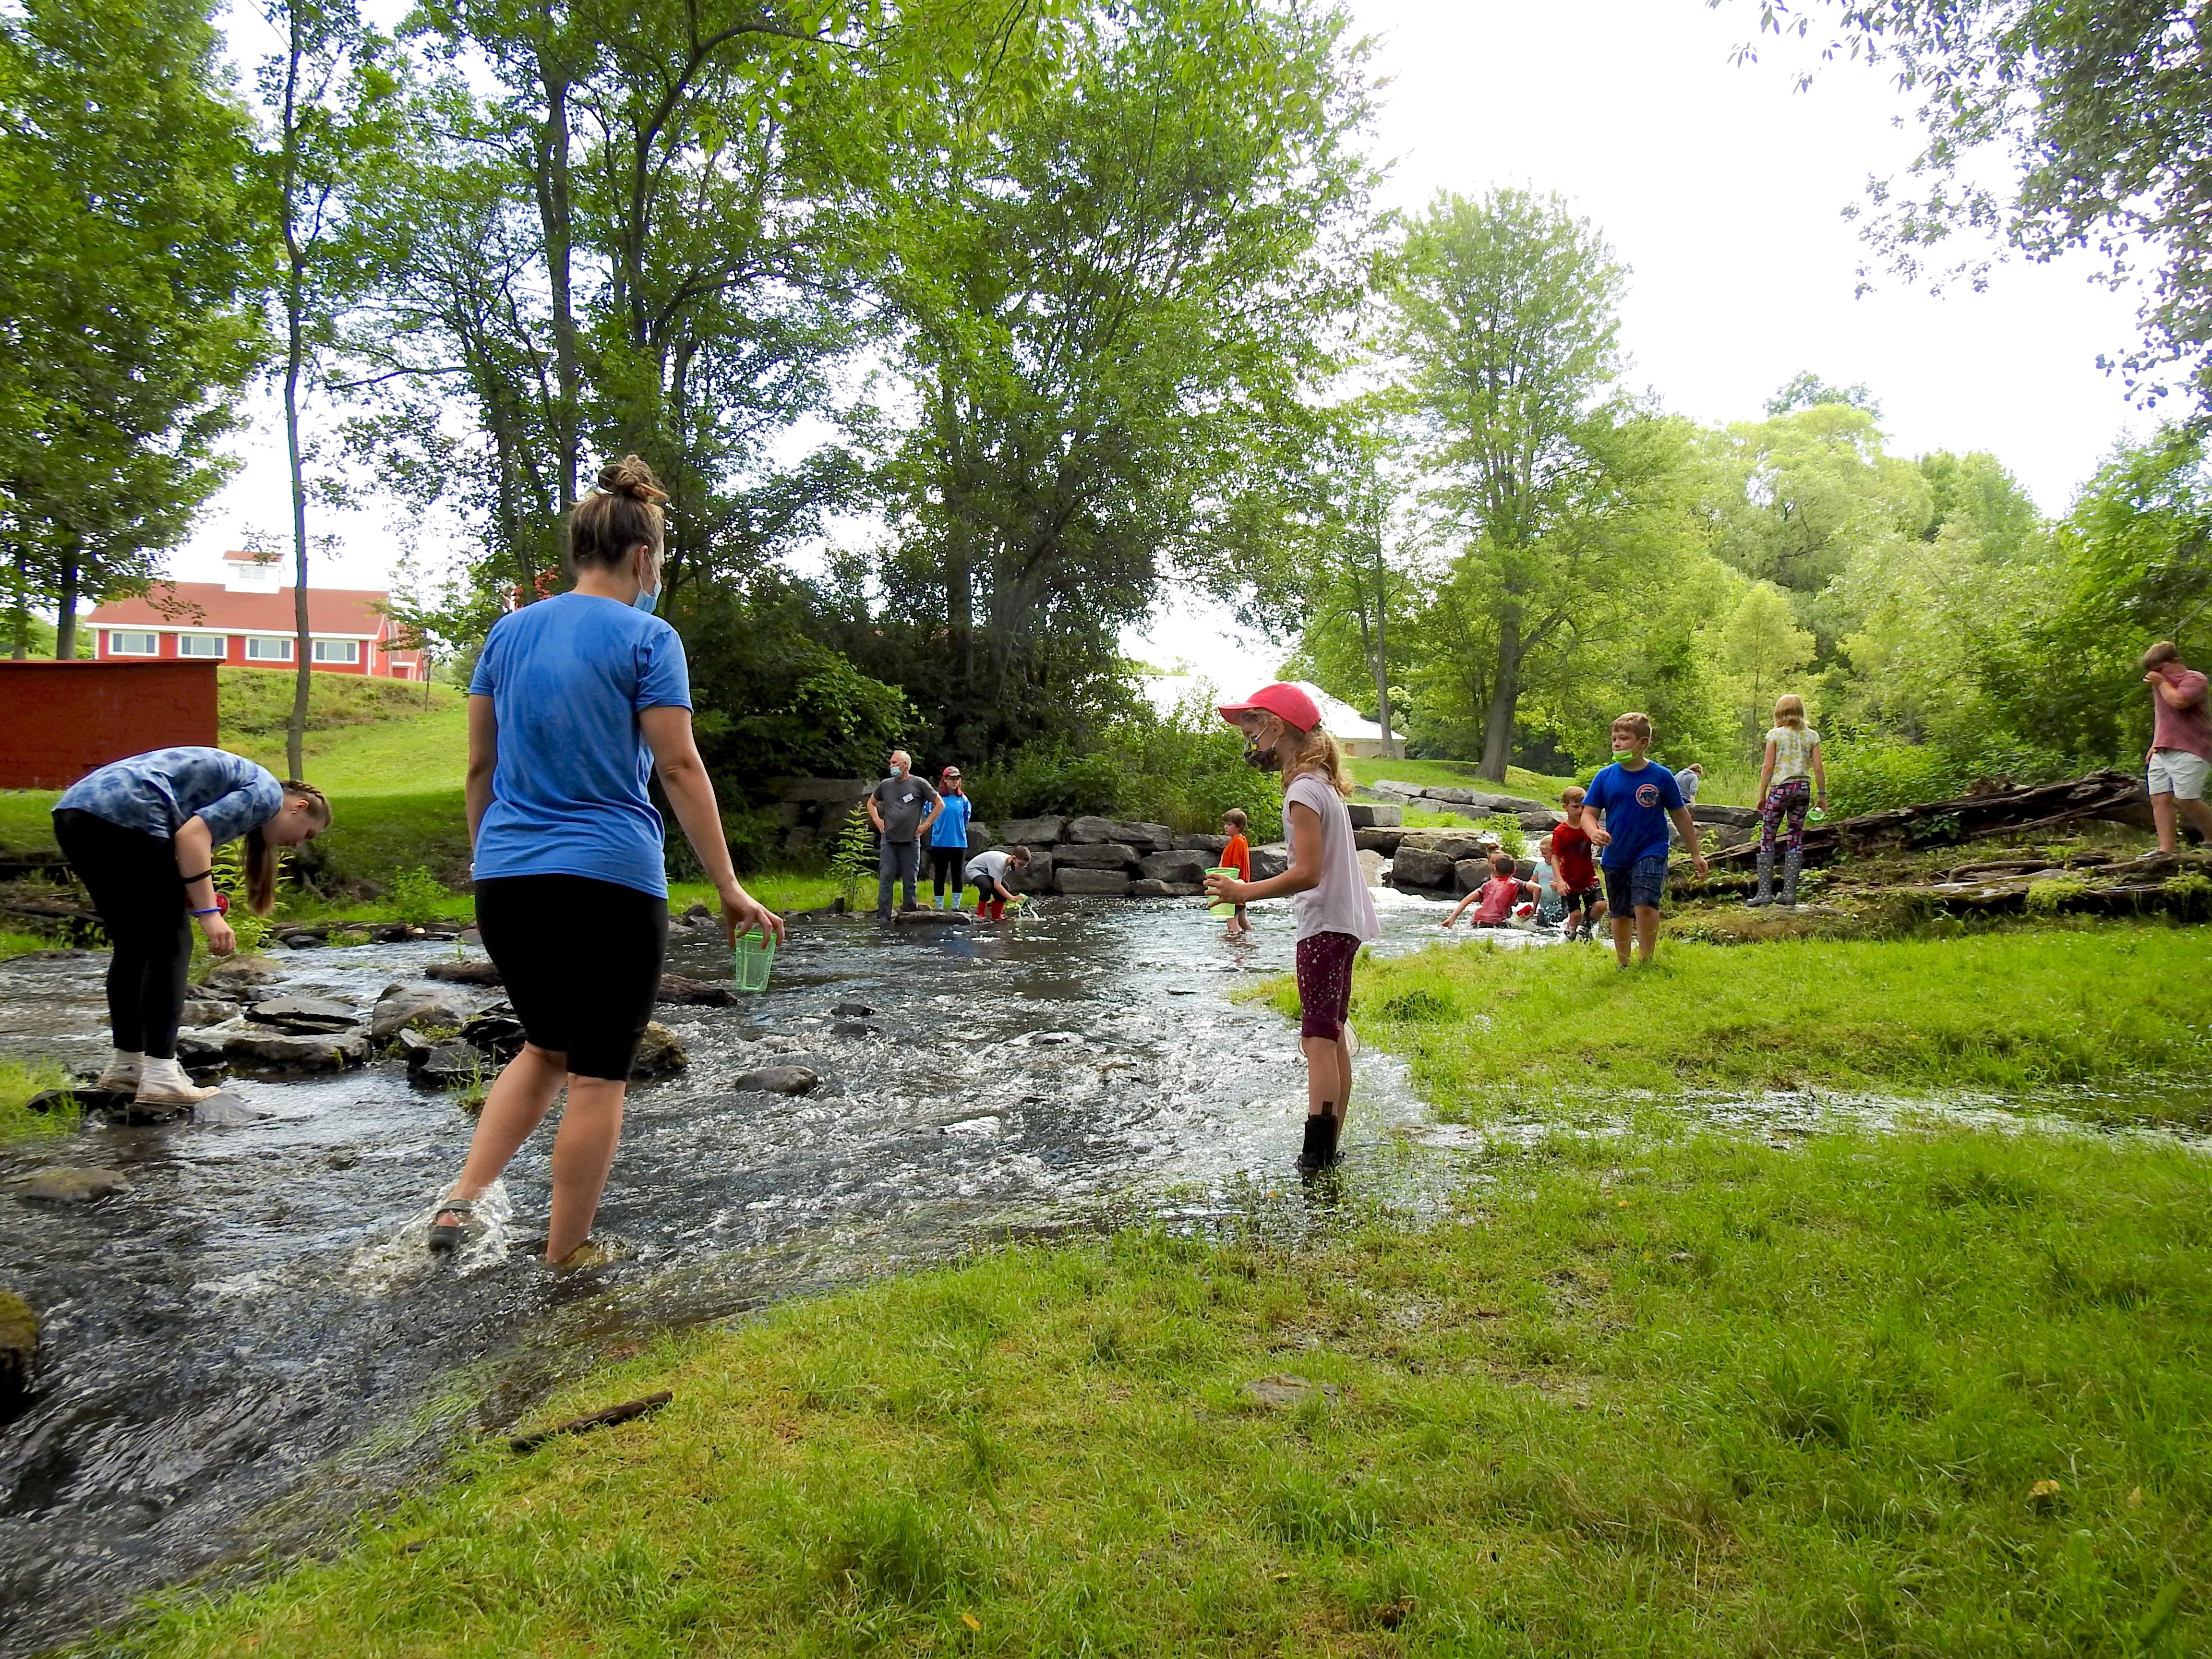 An instructor works with youngsters in a creek during a previous Explore Nature summer session